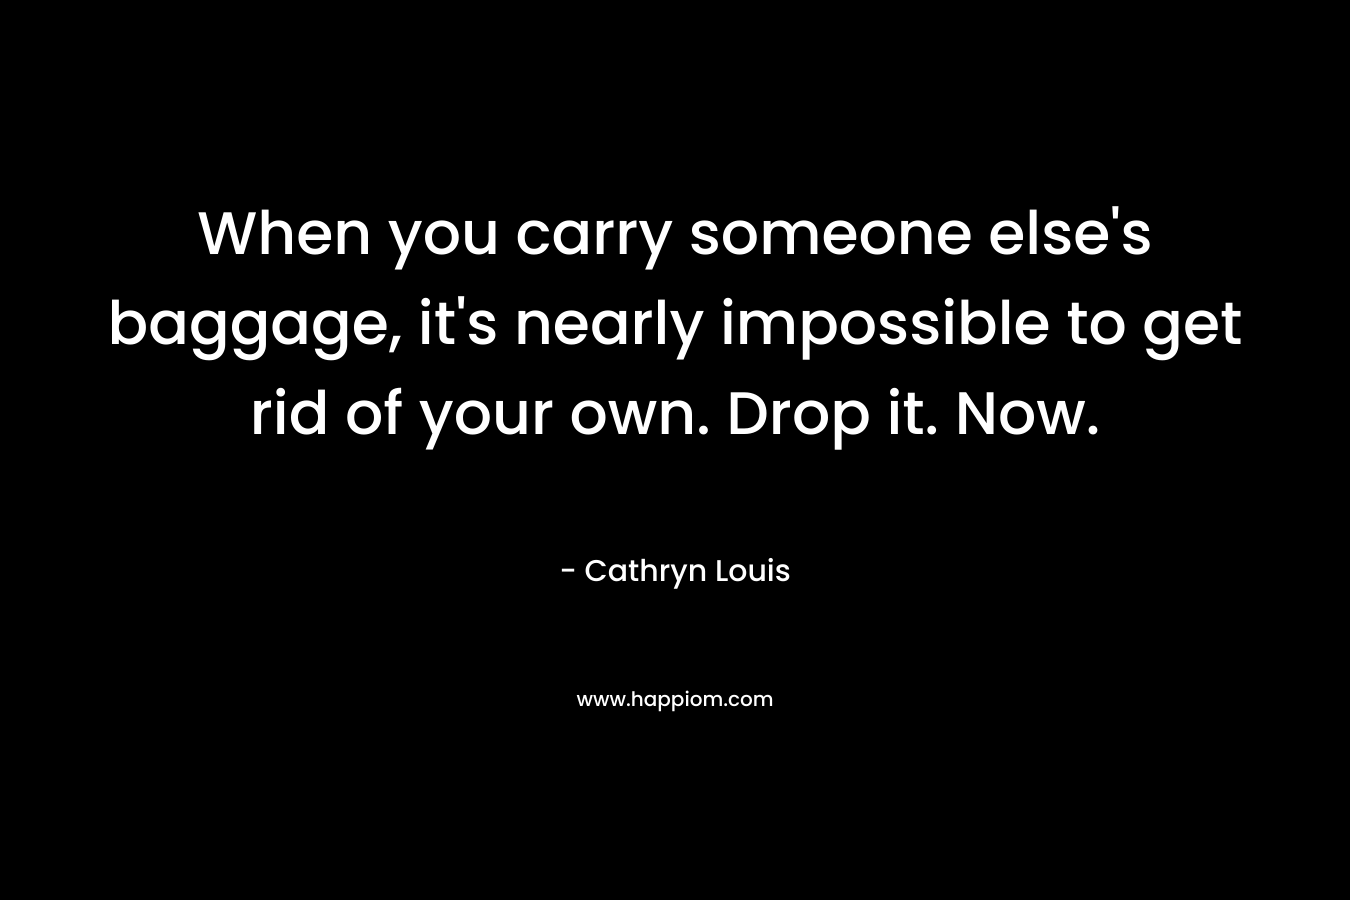 When you carry someone else's baggage, it's nearly impossible to get rid of your own. Drop it. Now.